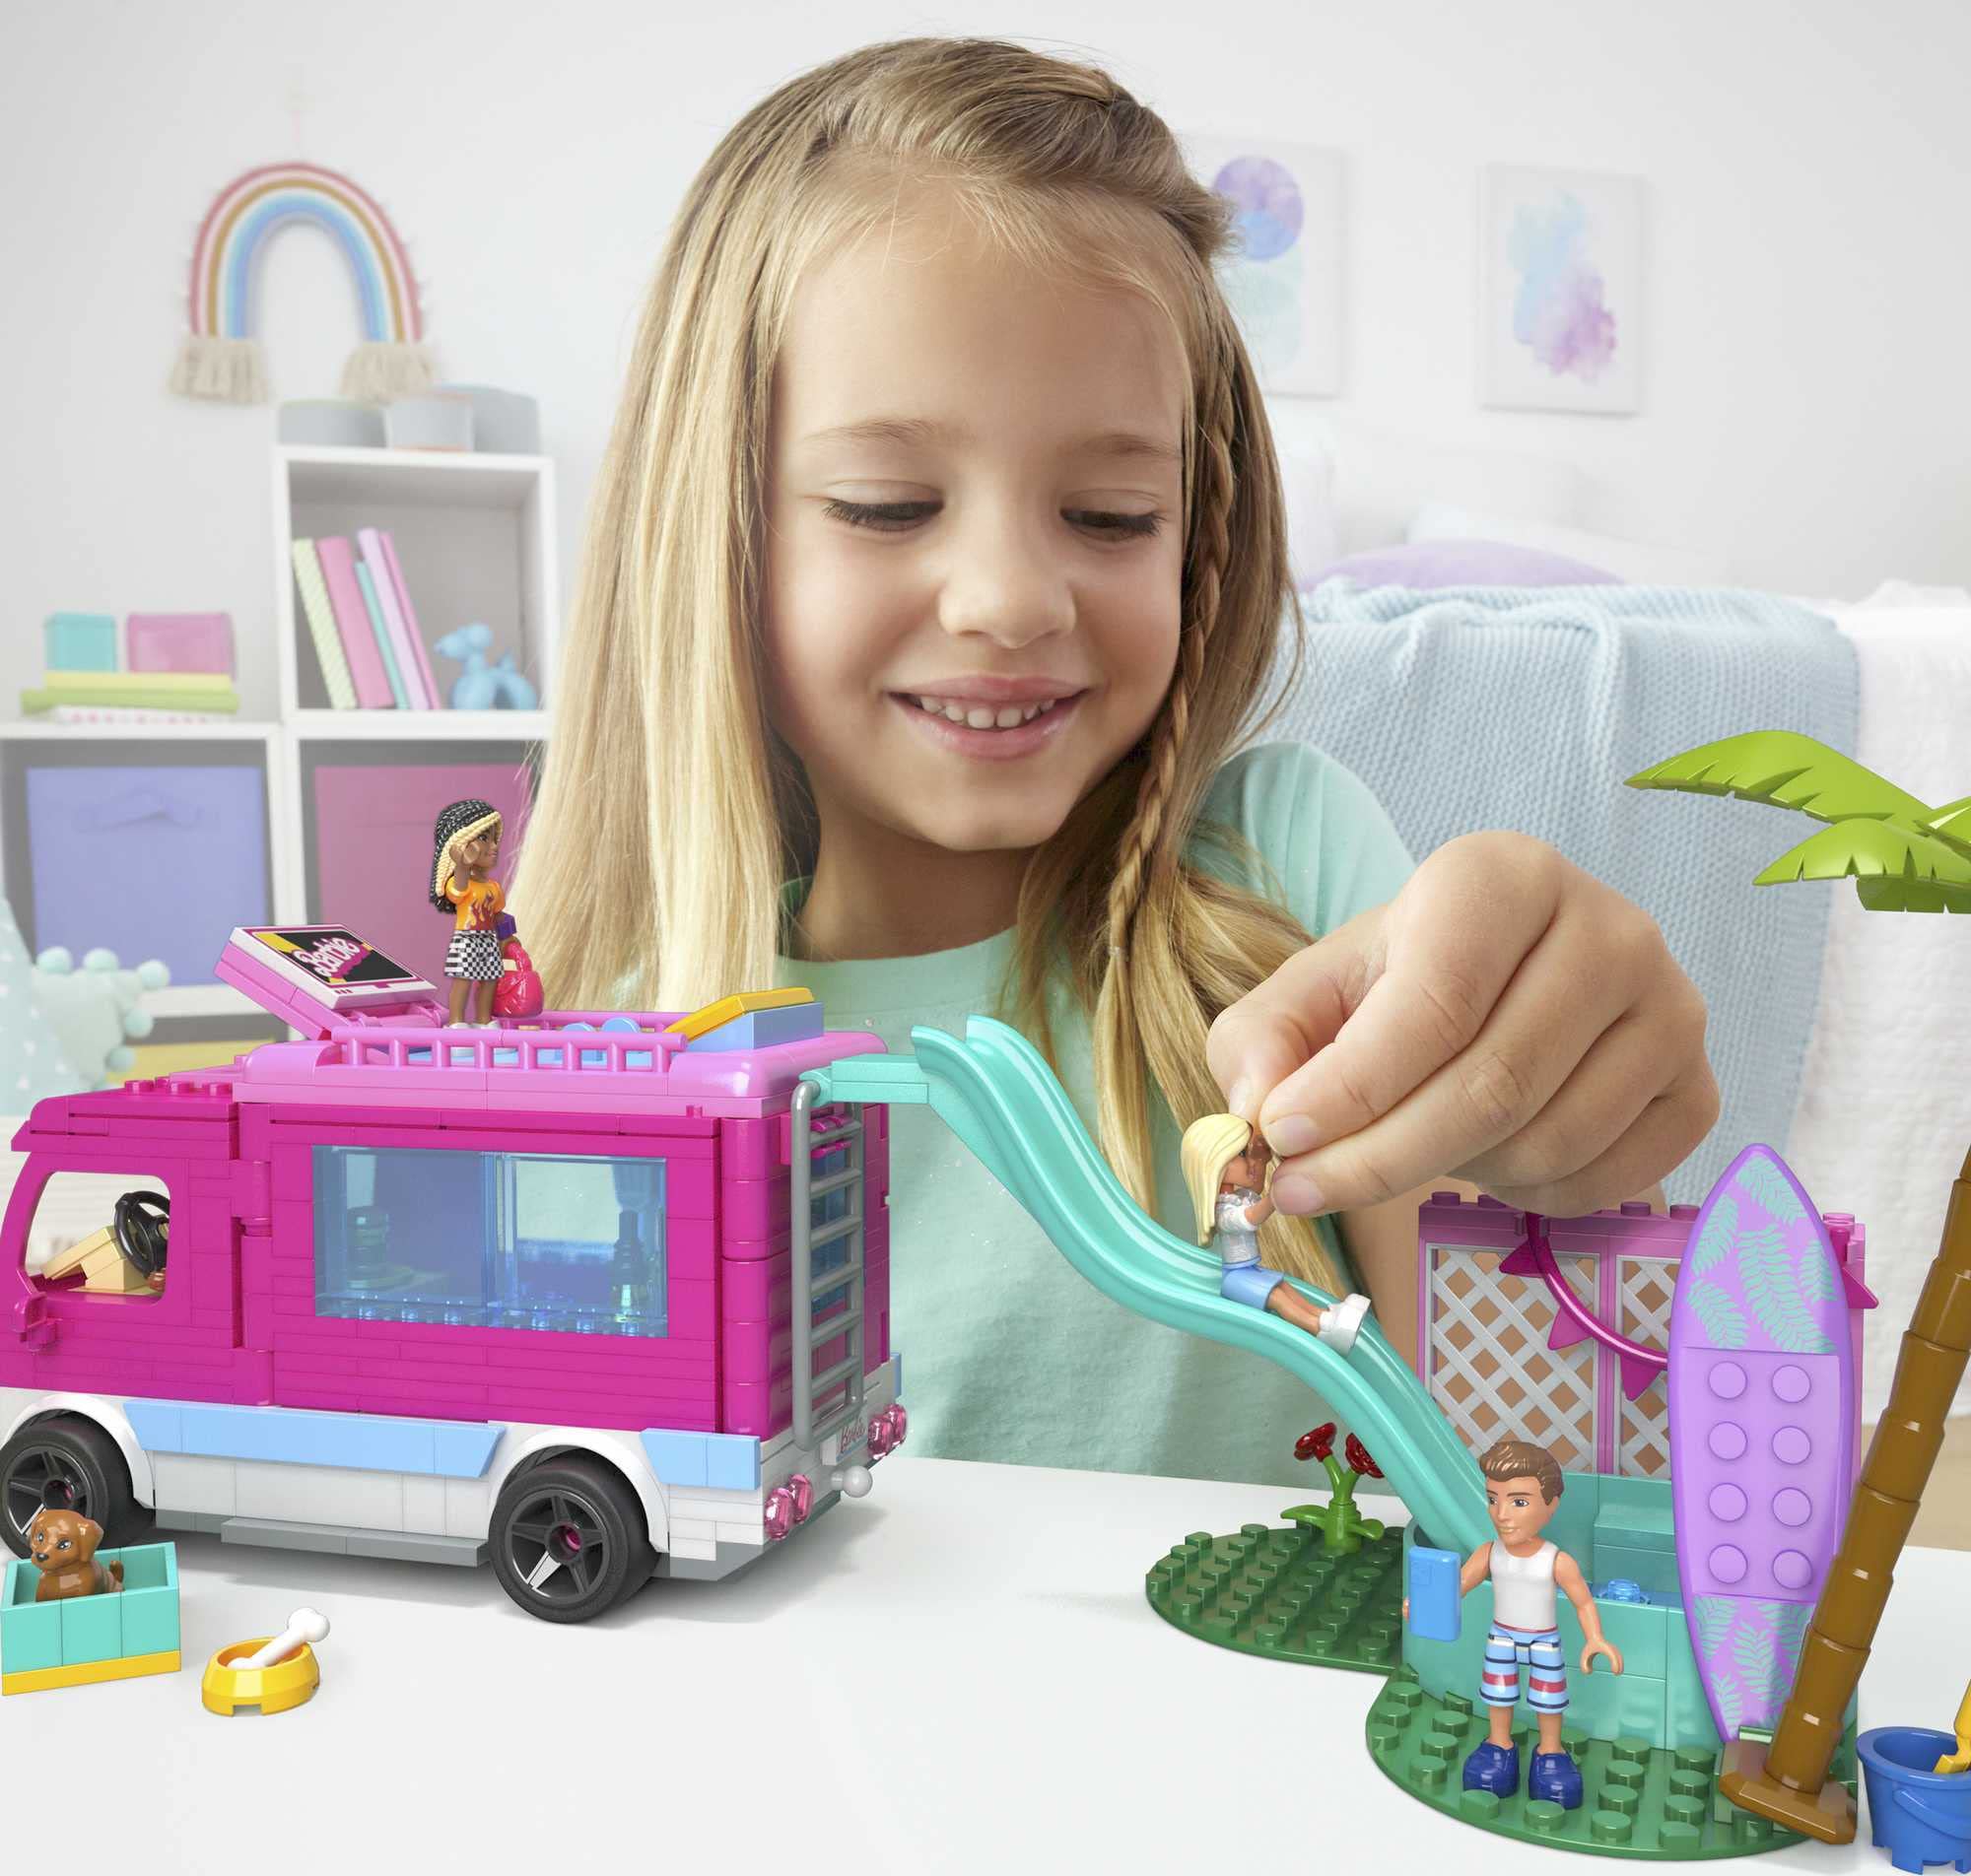 MEGA Barbie Car Building Toys Playset, Dream Camper Adventure With 580 Pieces, 4 Micro-Dolls and Accessories, Pink, For Kids Age 6+ Years